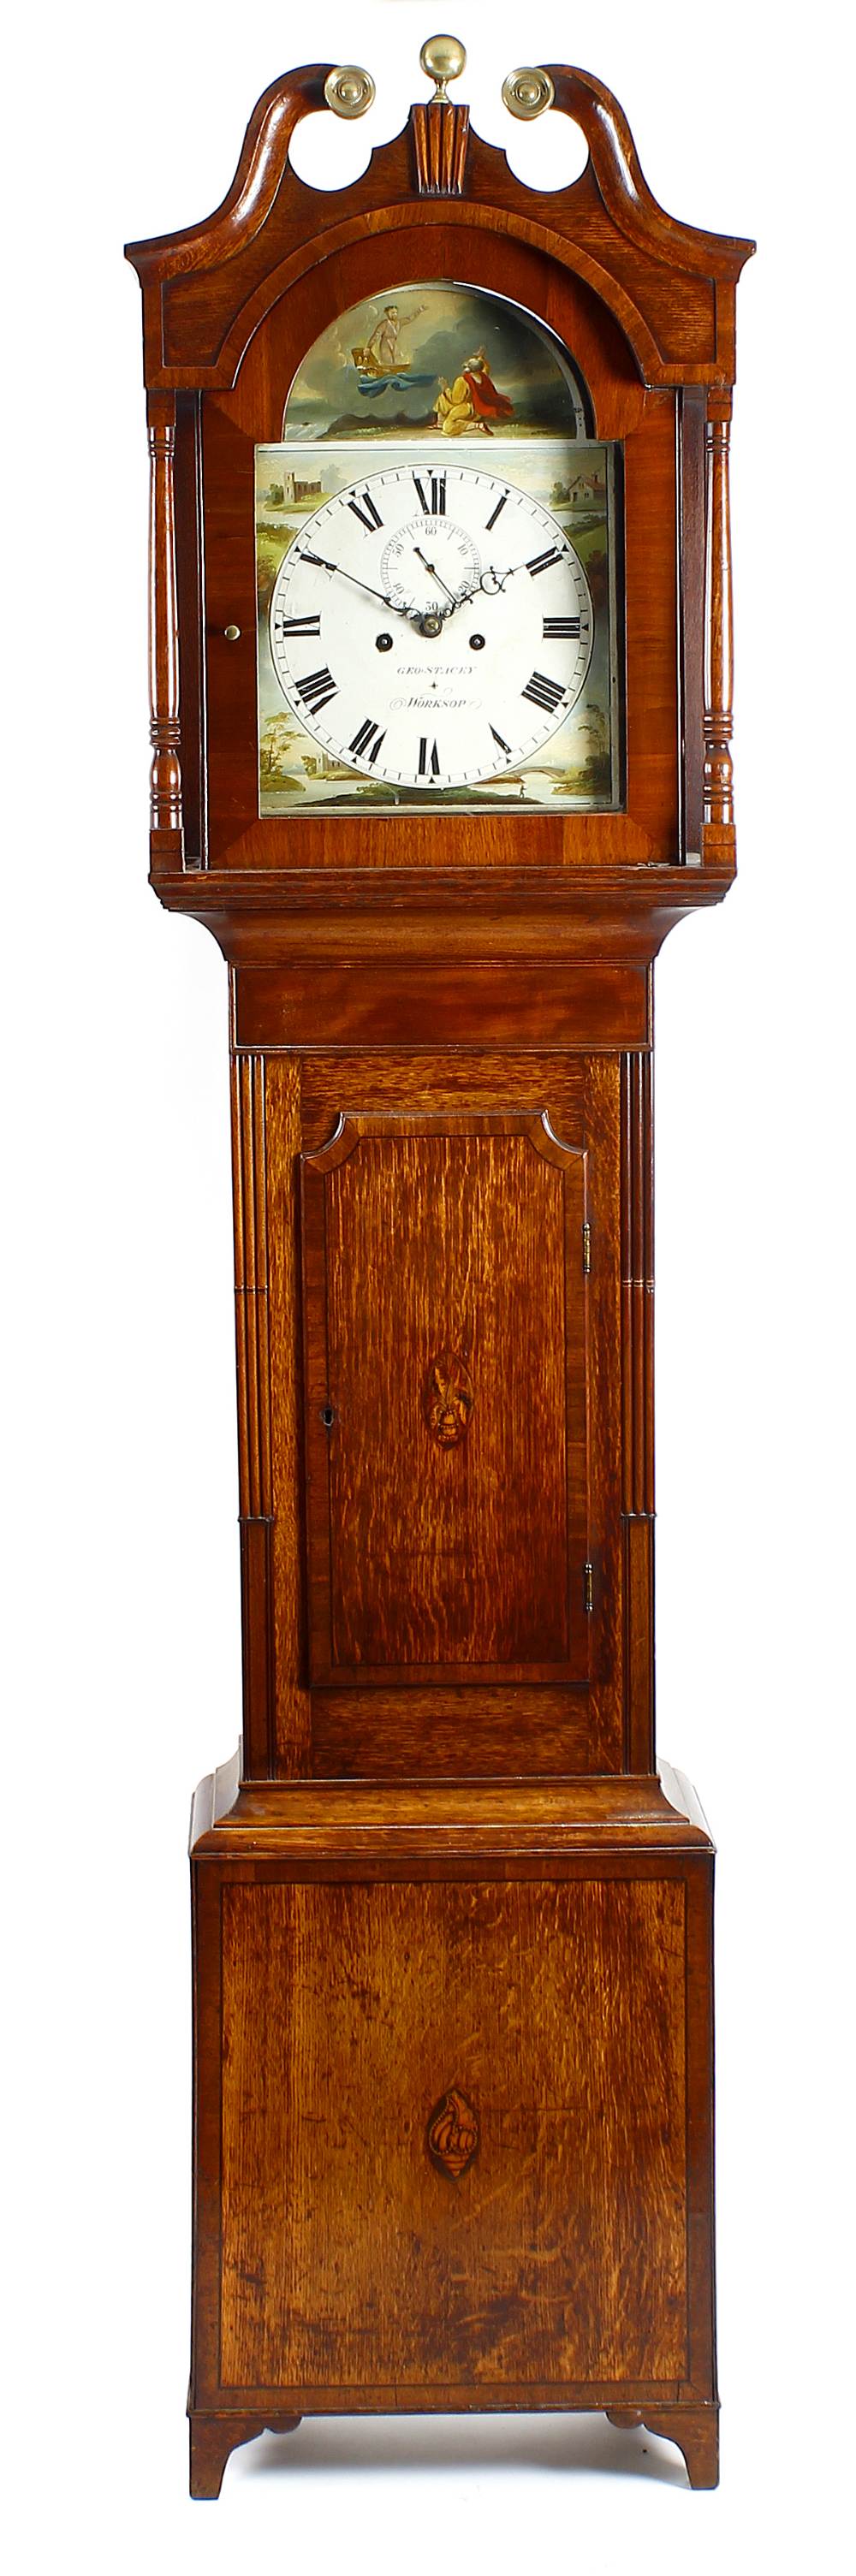 An early 19th century oak and mahogany-cased 8-day painted dial longcase clock George Stacey,